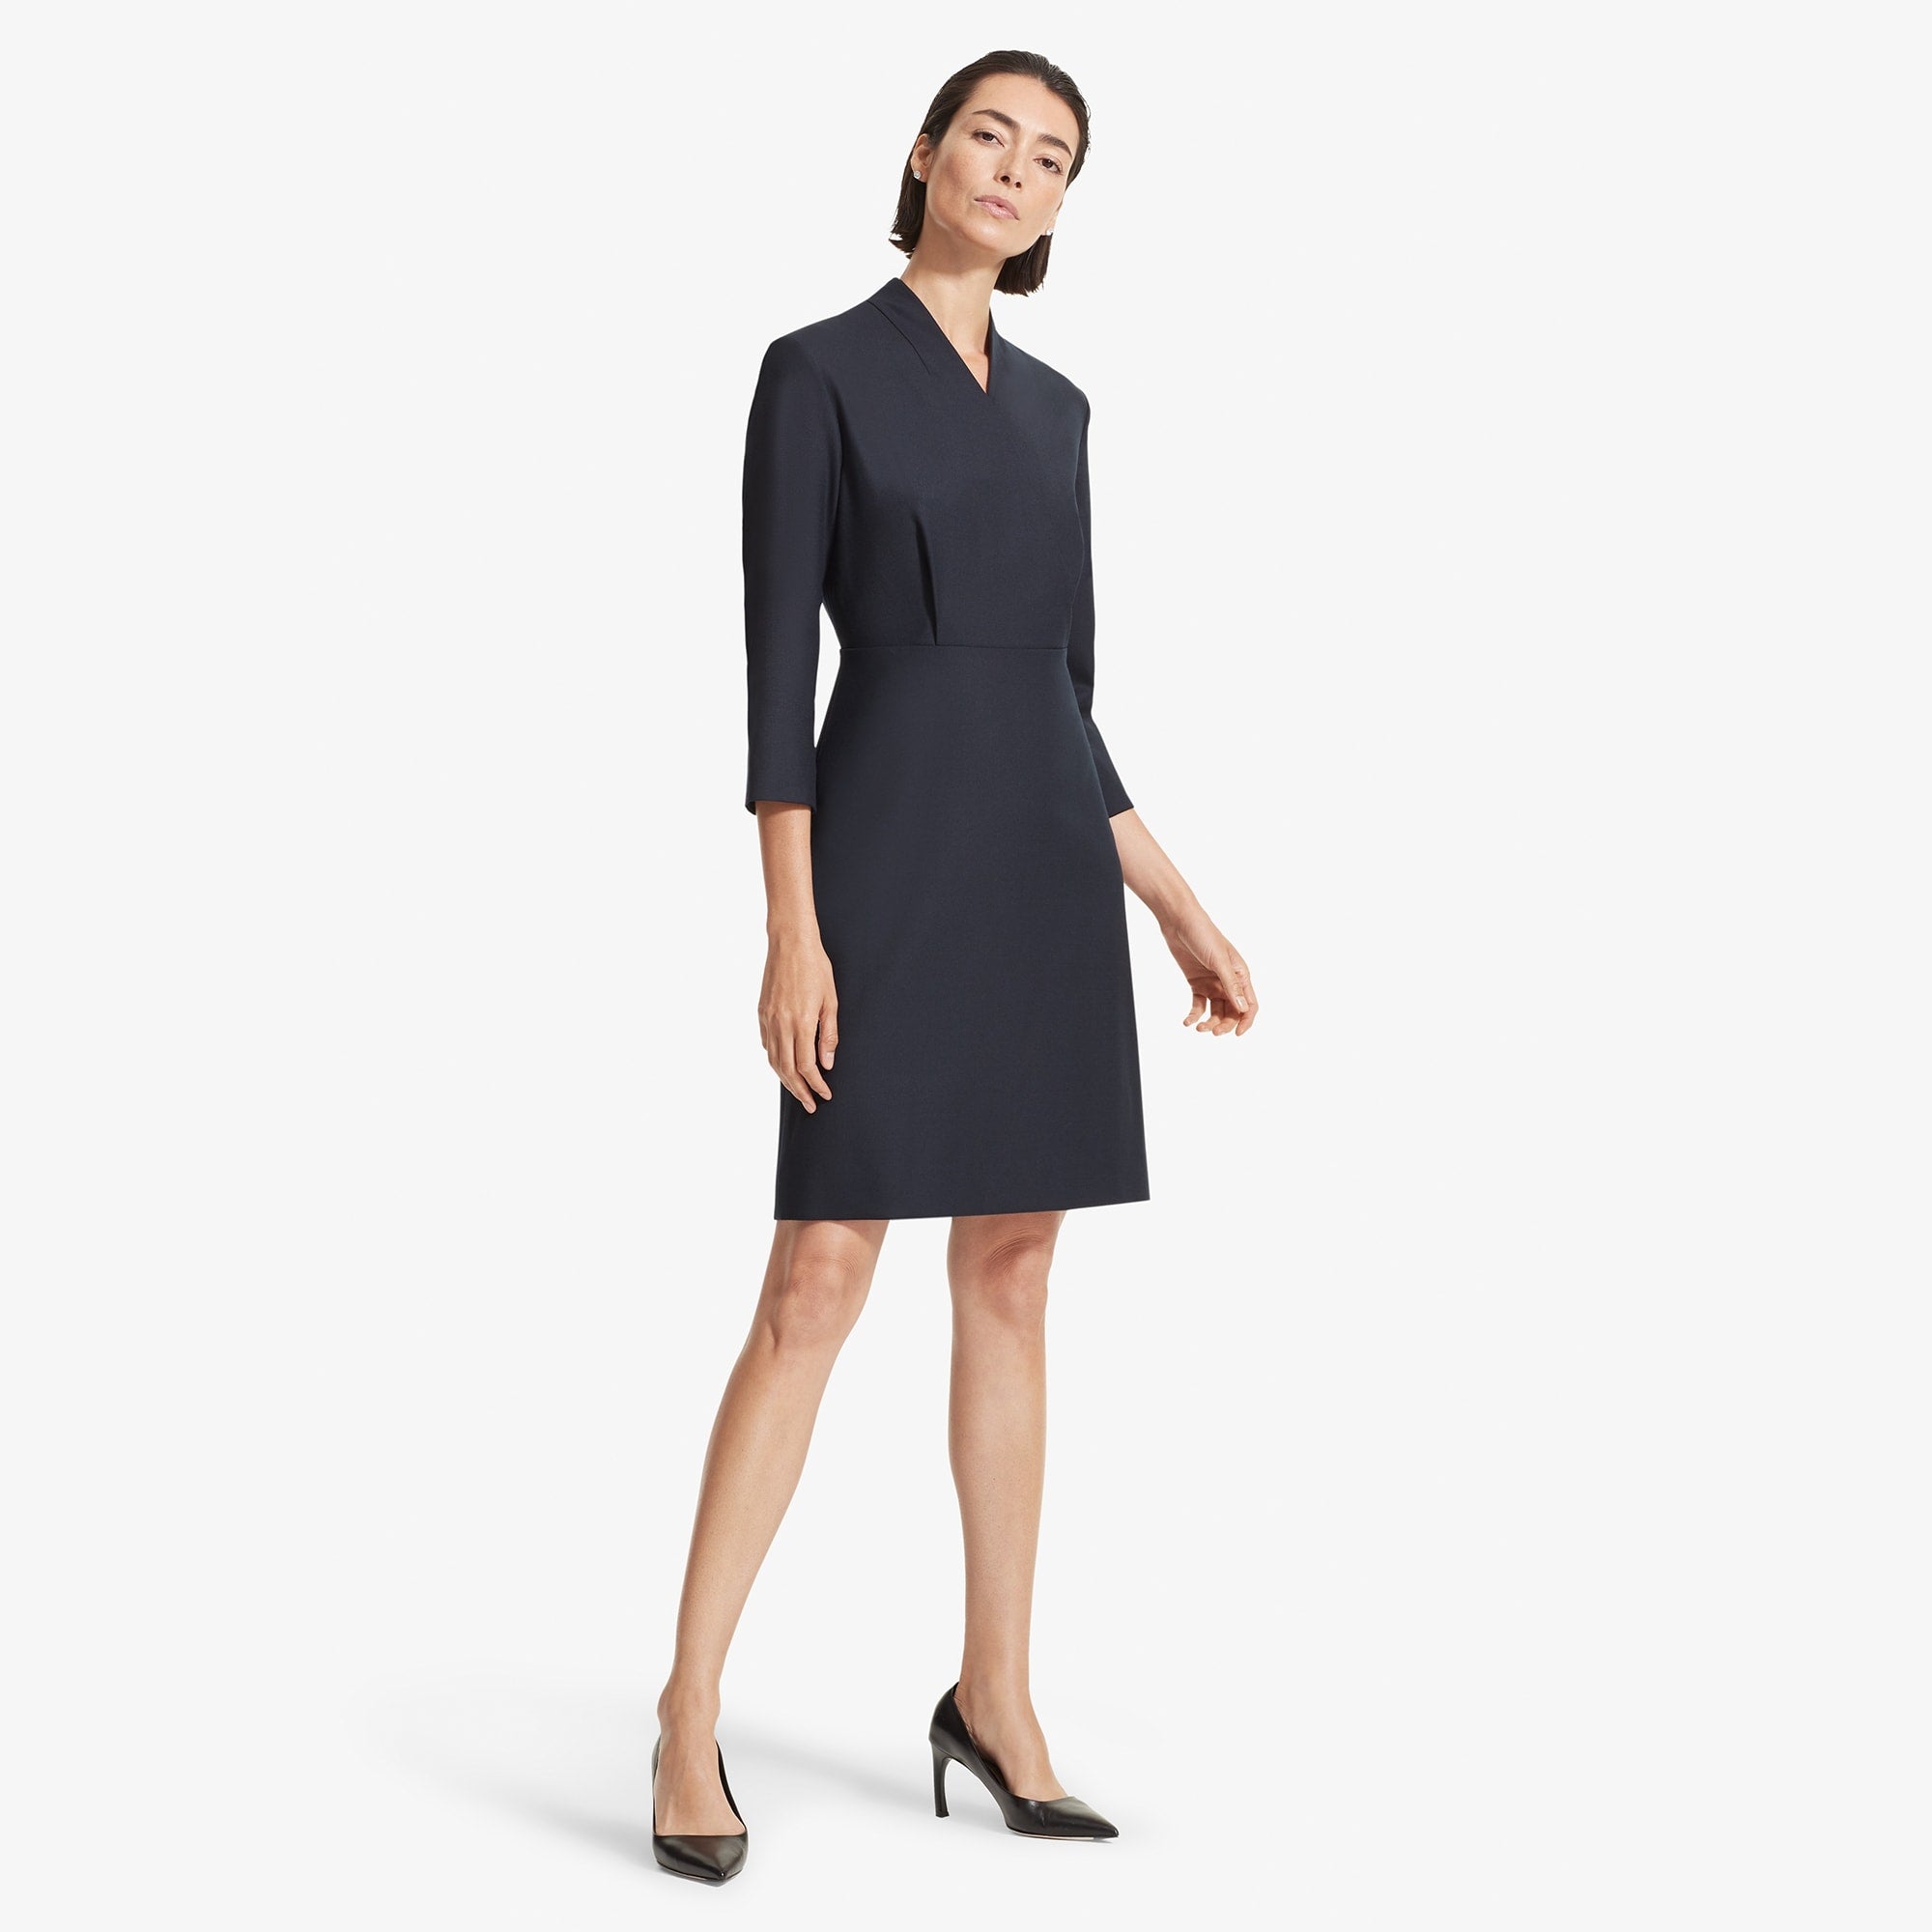 Front image of a woman standing wearing the Niko dress sharkskin in Ink 